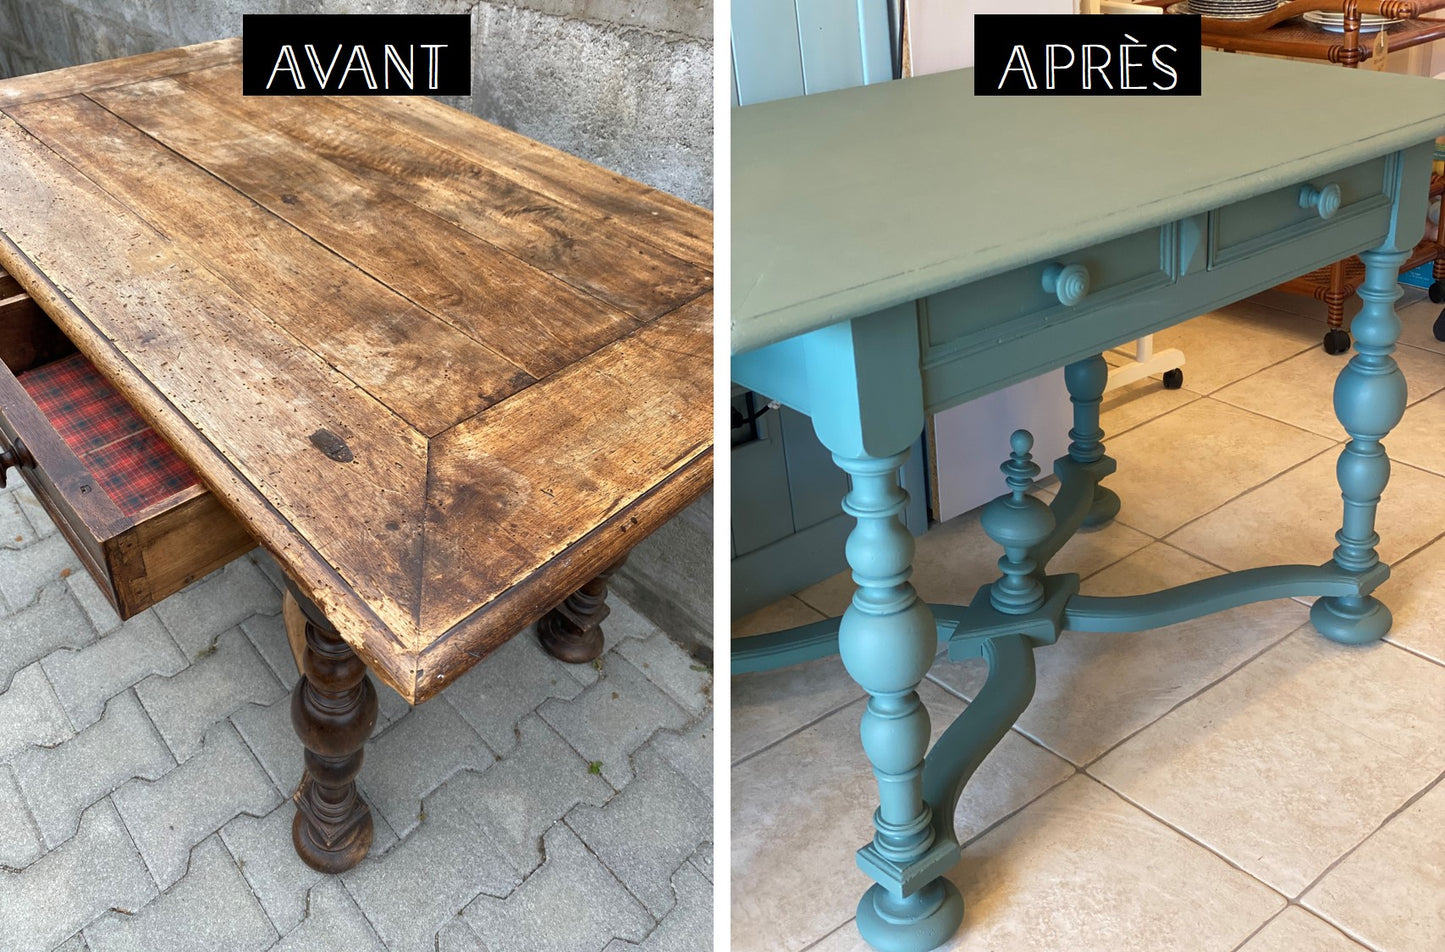 Table ancienne